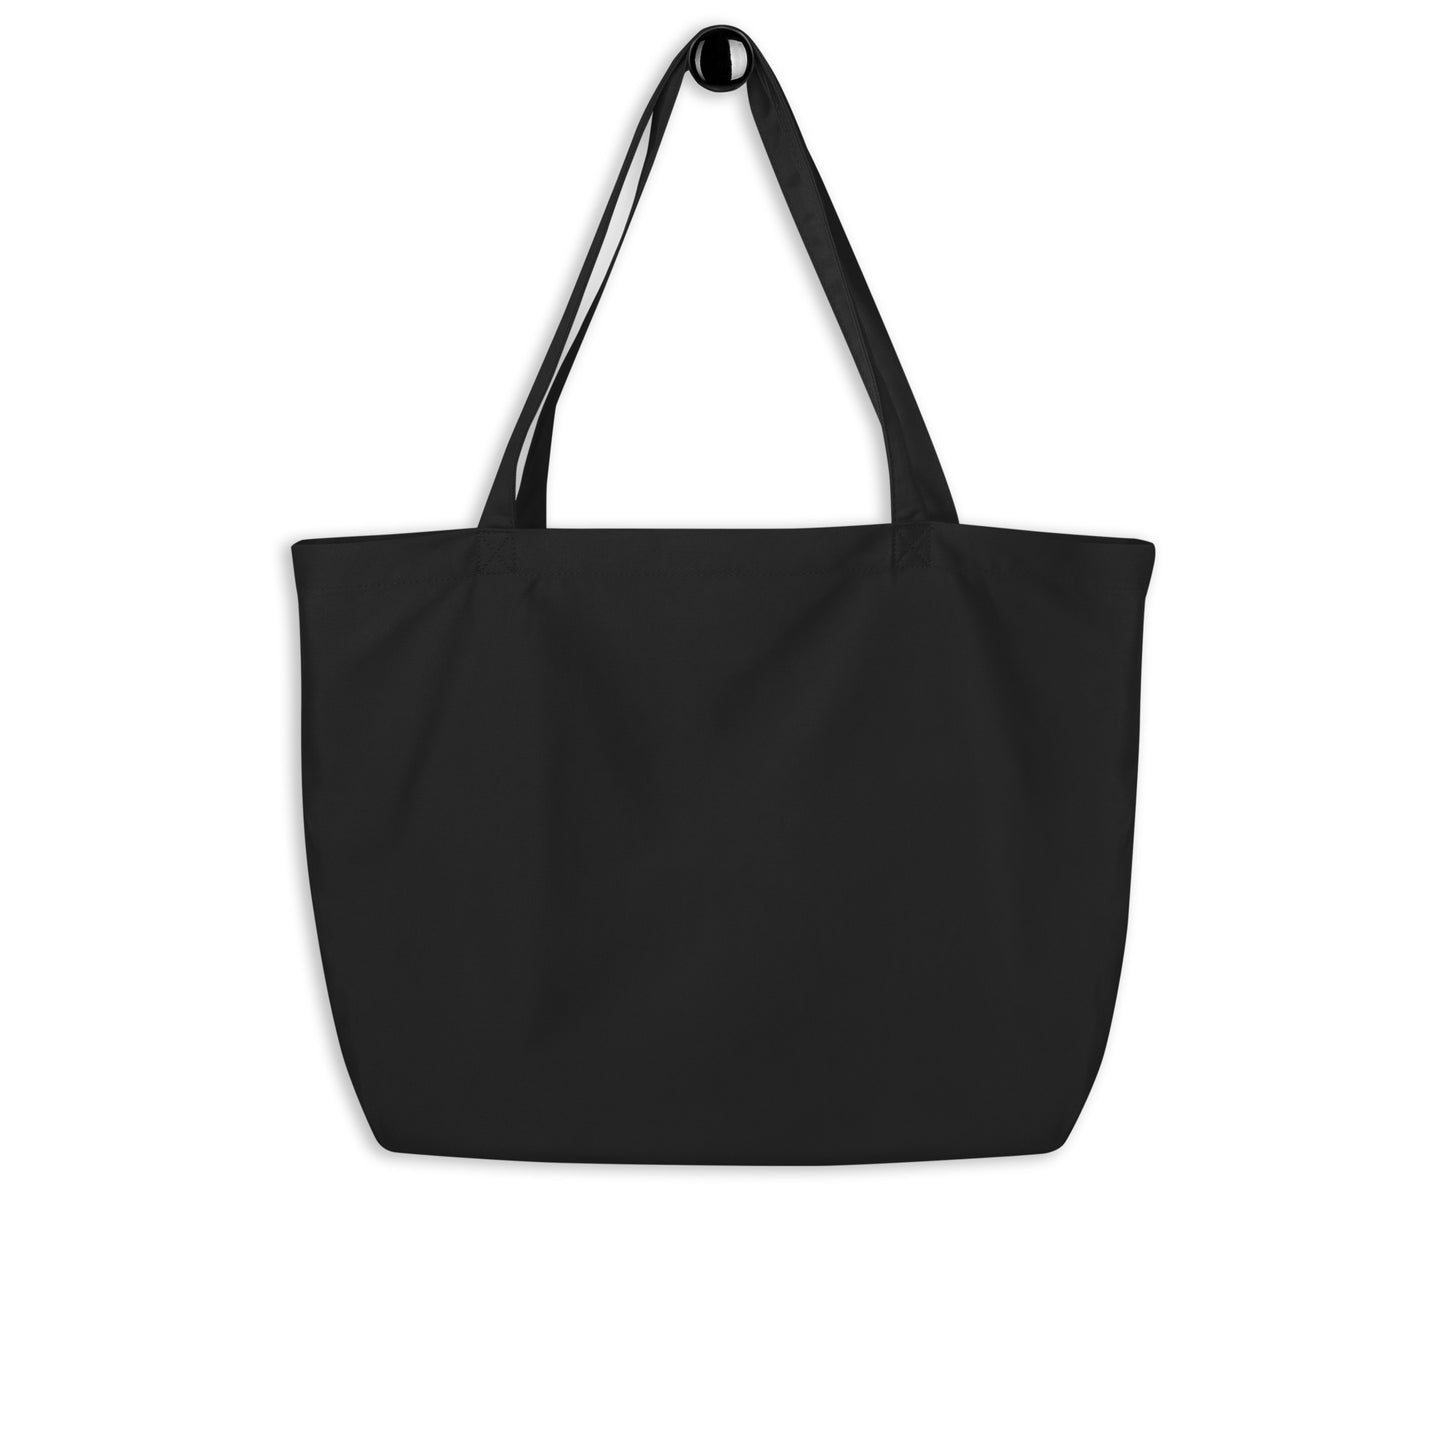 Divinely Well Ministires Large tote bag